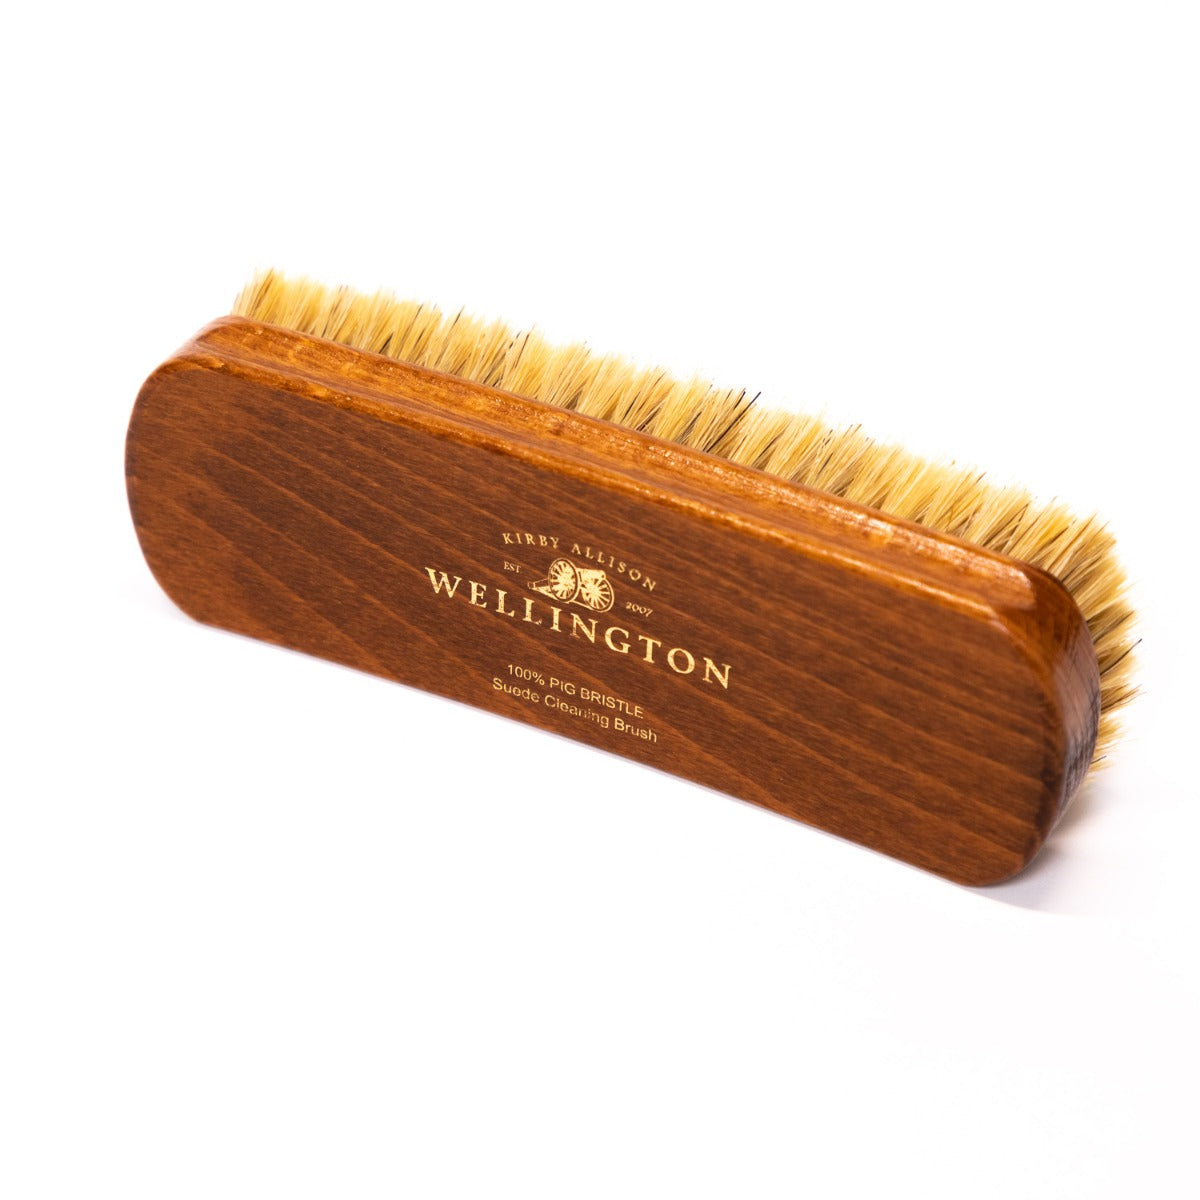 When to Use a Pig Bristle Shoeshine Brush